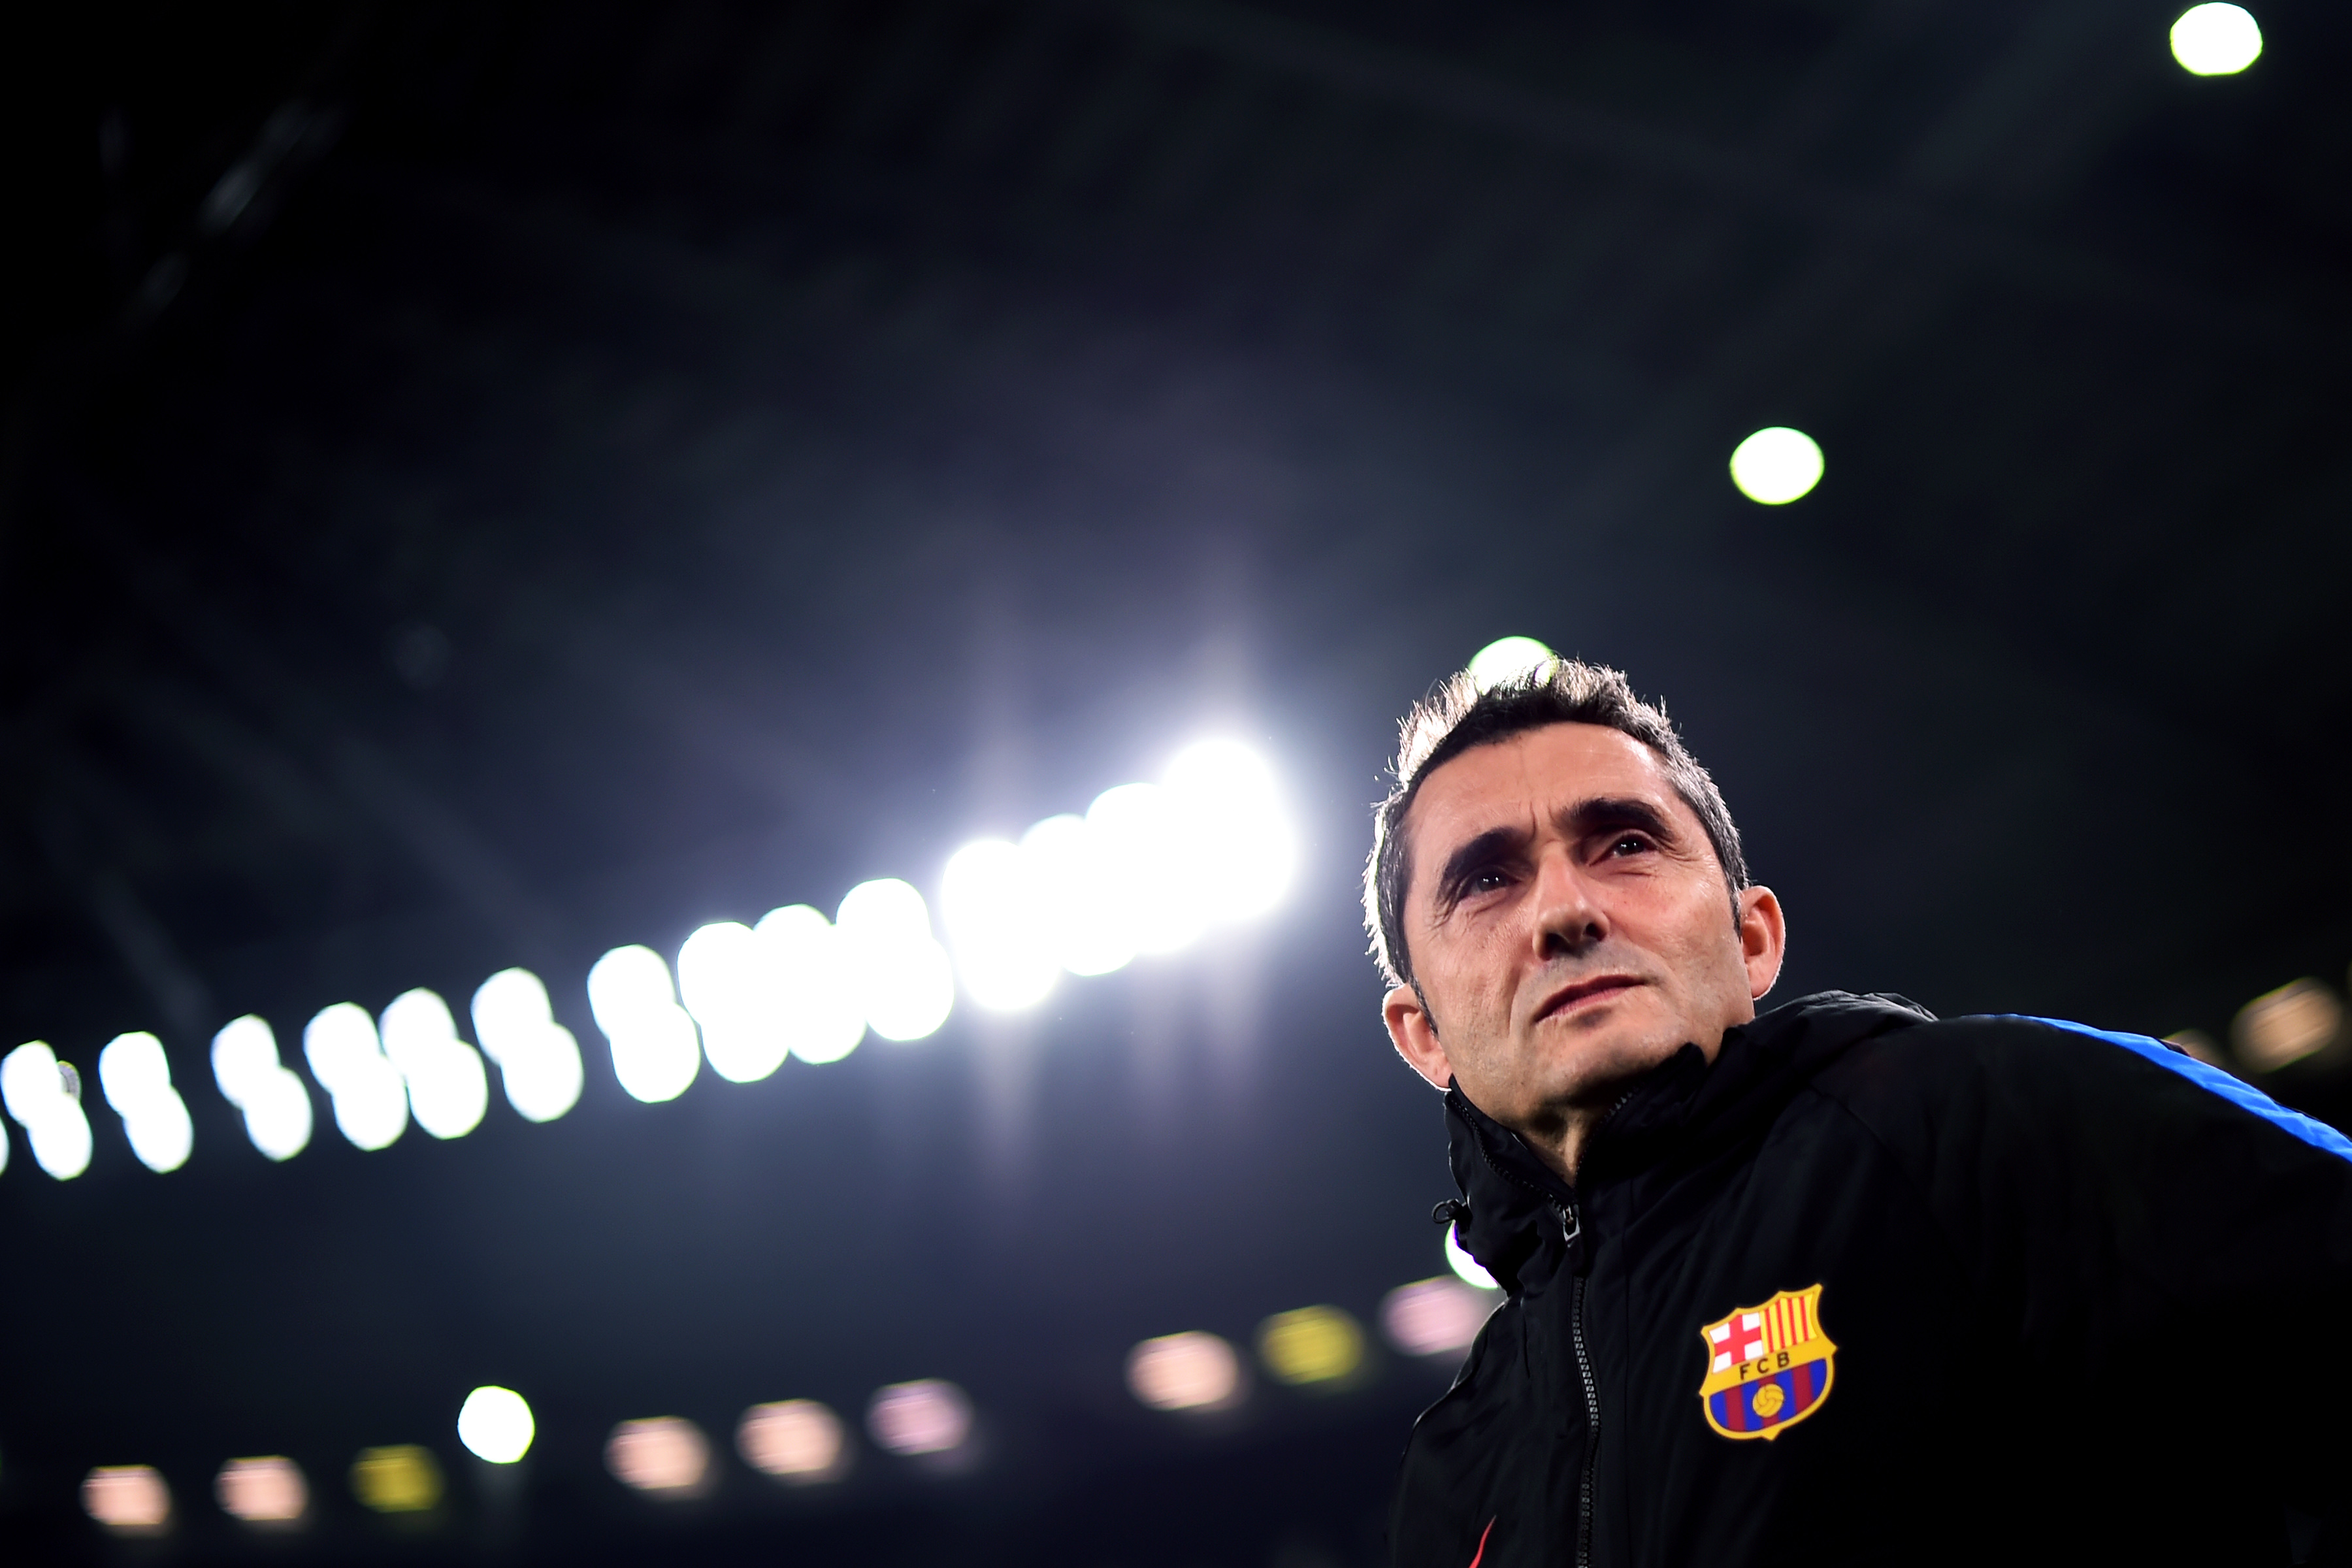 Barcelona's coach Ernesto Valverde from Spain attends a training session on the eve of the UEFA Champions League football match Juventus Vs Barcelona on November 21, 2017 at the 'Juventus Stadium' in Turin.  / AFP PHOTO / MARCO BERTORELLO        (Photo credit should read MARCO BERTORELLO/AFP/Getty Images)